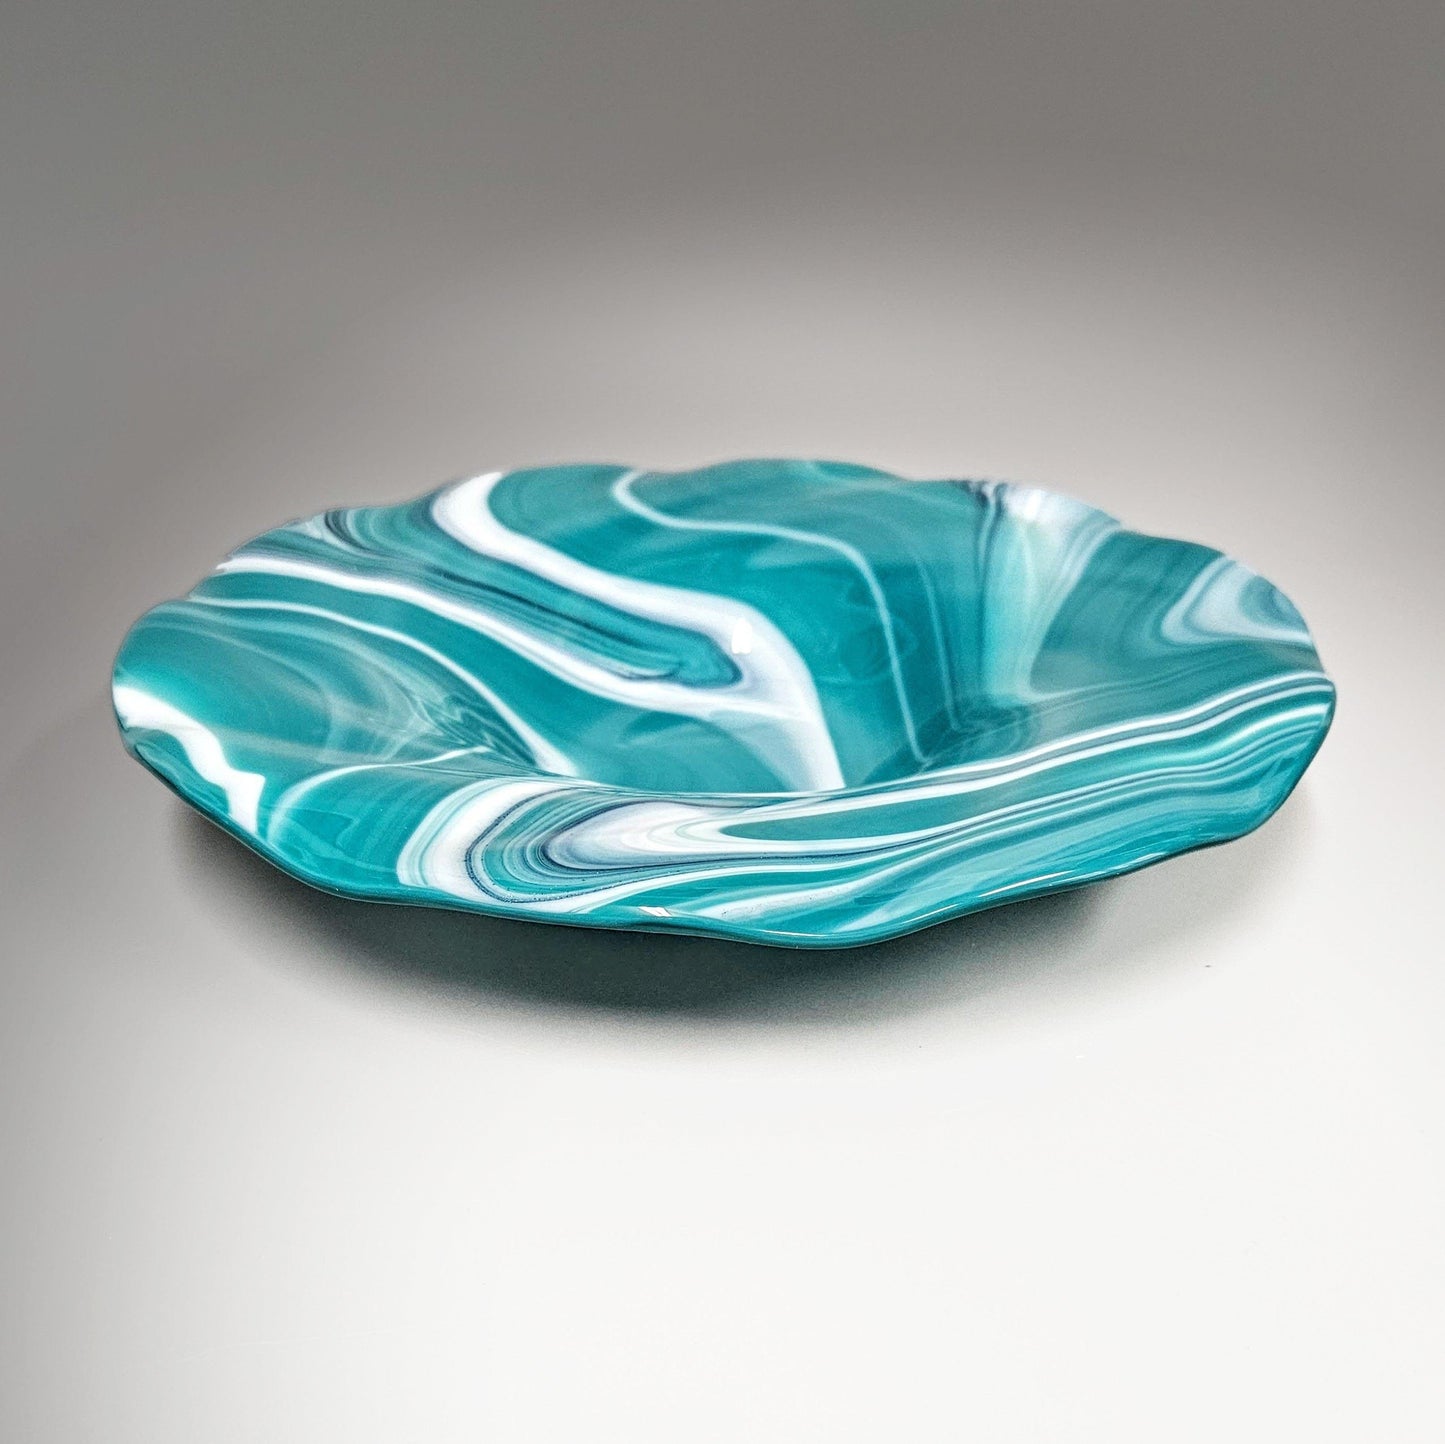 Decorative Glass Art Bowl in Peacock Blue Green